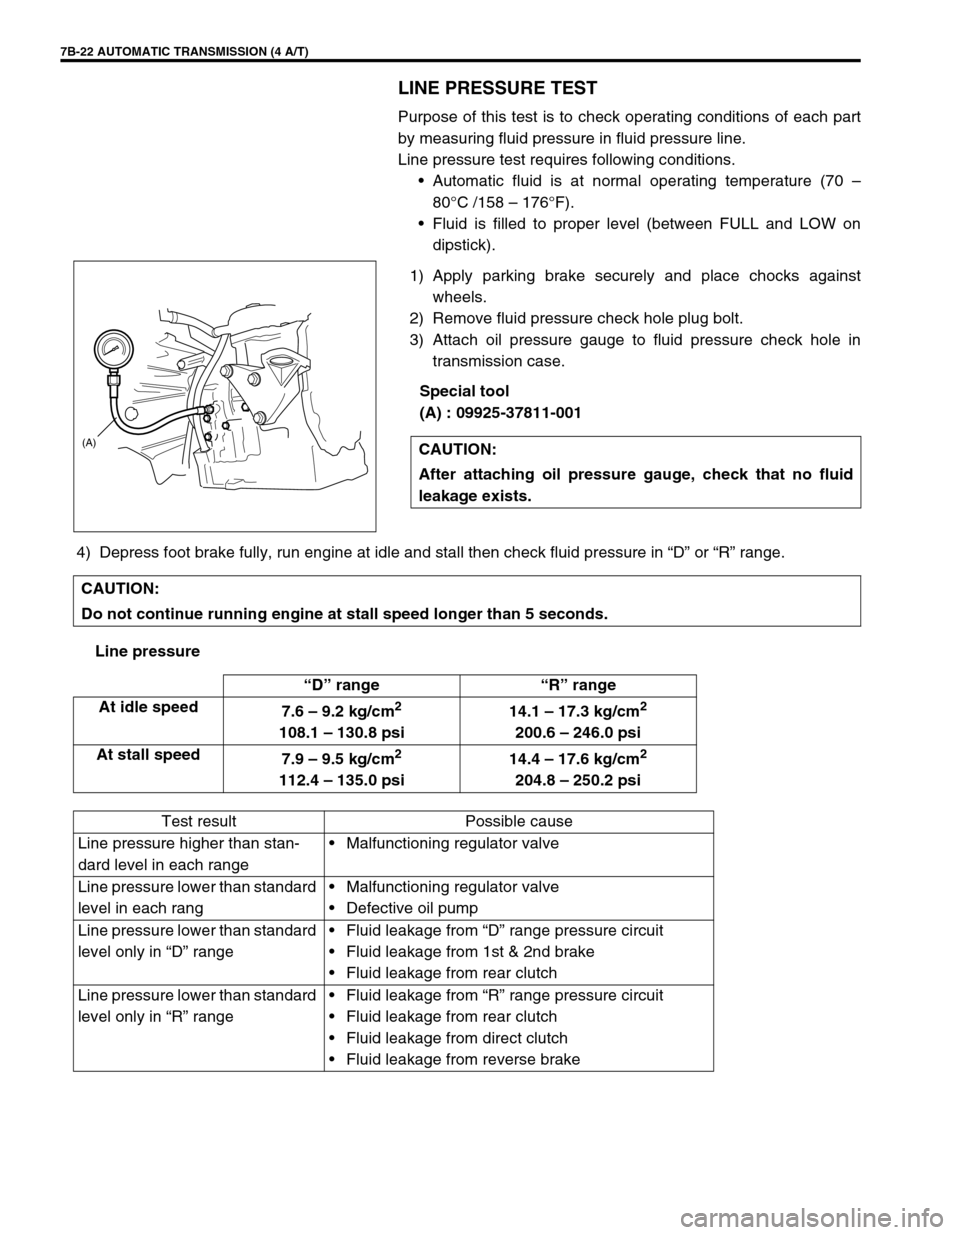 SUZUKI SWIFT 2000 1.G Transmission Service User Guide 7B-22 AUTOMATIC TRANSMISSION (4 A/T)
LINE PRESSURE TEST
Purpose of this test is to check operating conditions of each part
by measuring fluid pressure in fluid pressure line.
Line pressure test requir